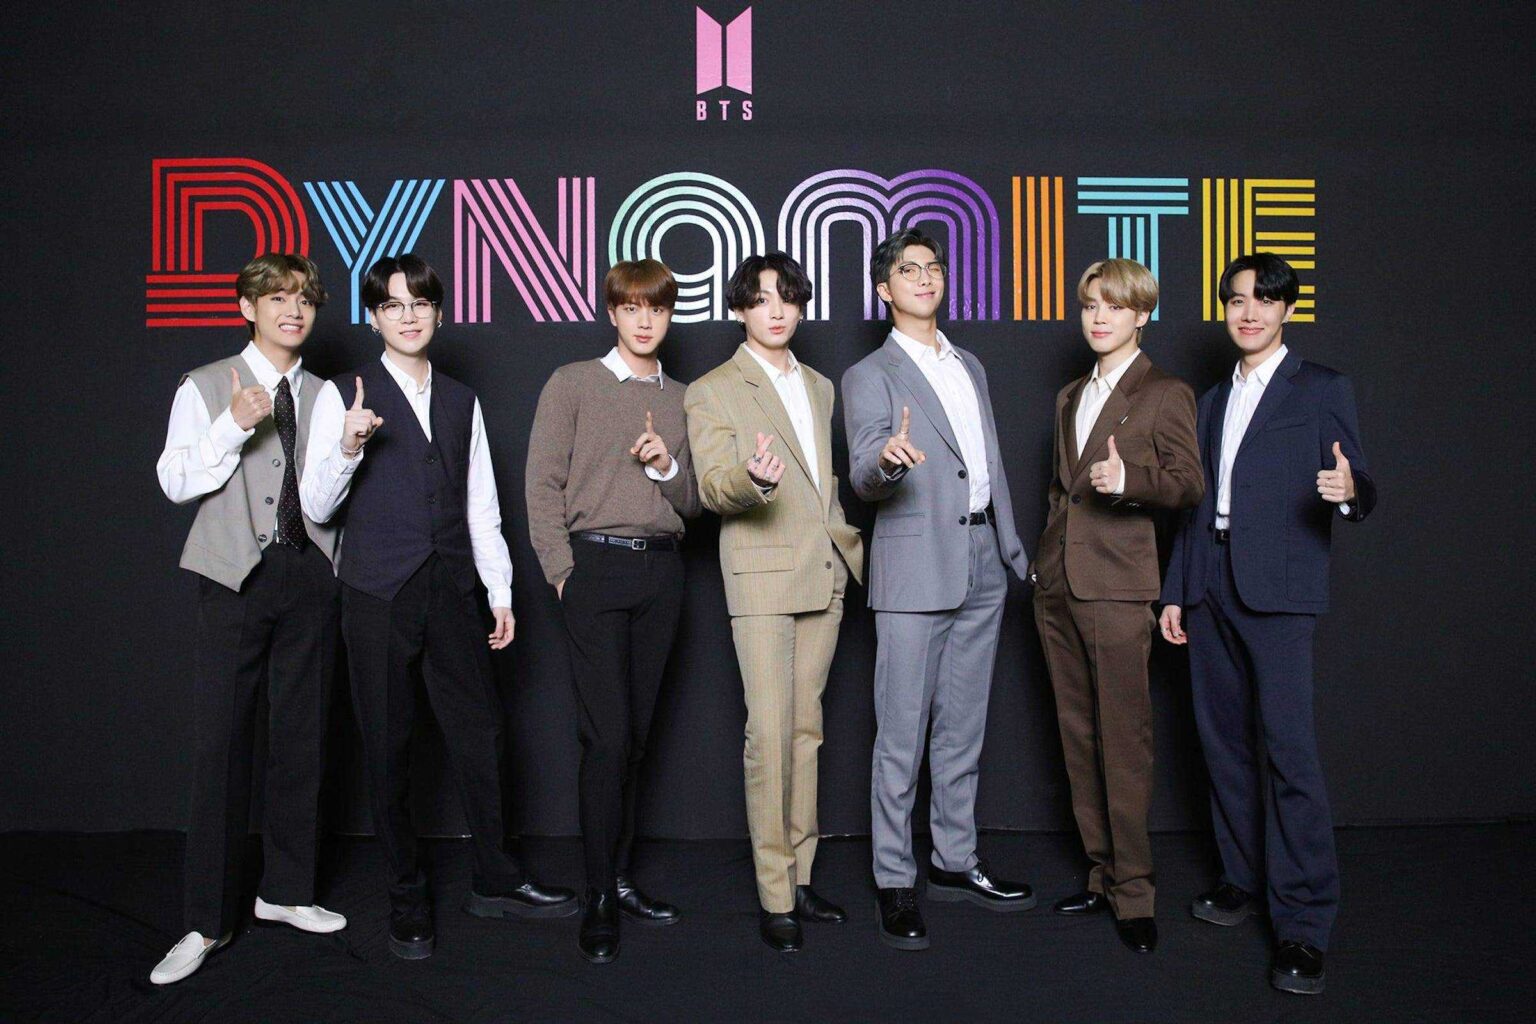 BTS scored a crossover smash with their song ‘Dynamite.’ Why did the K-pop group decide to record it with English lyrics?